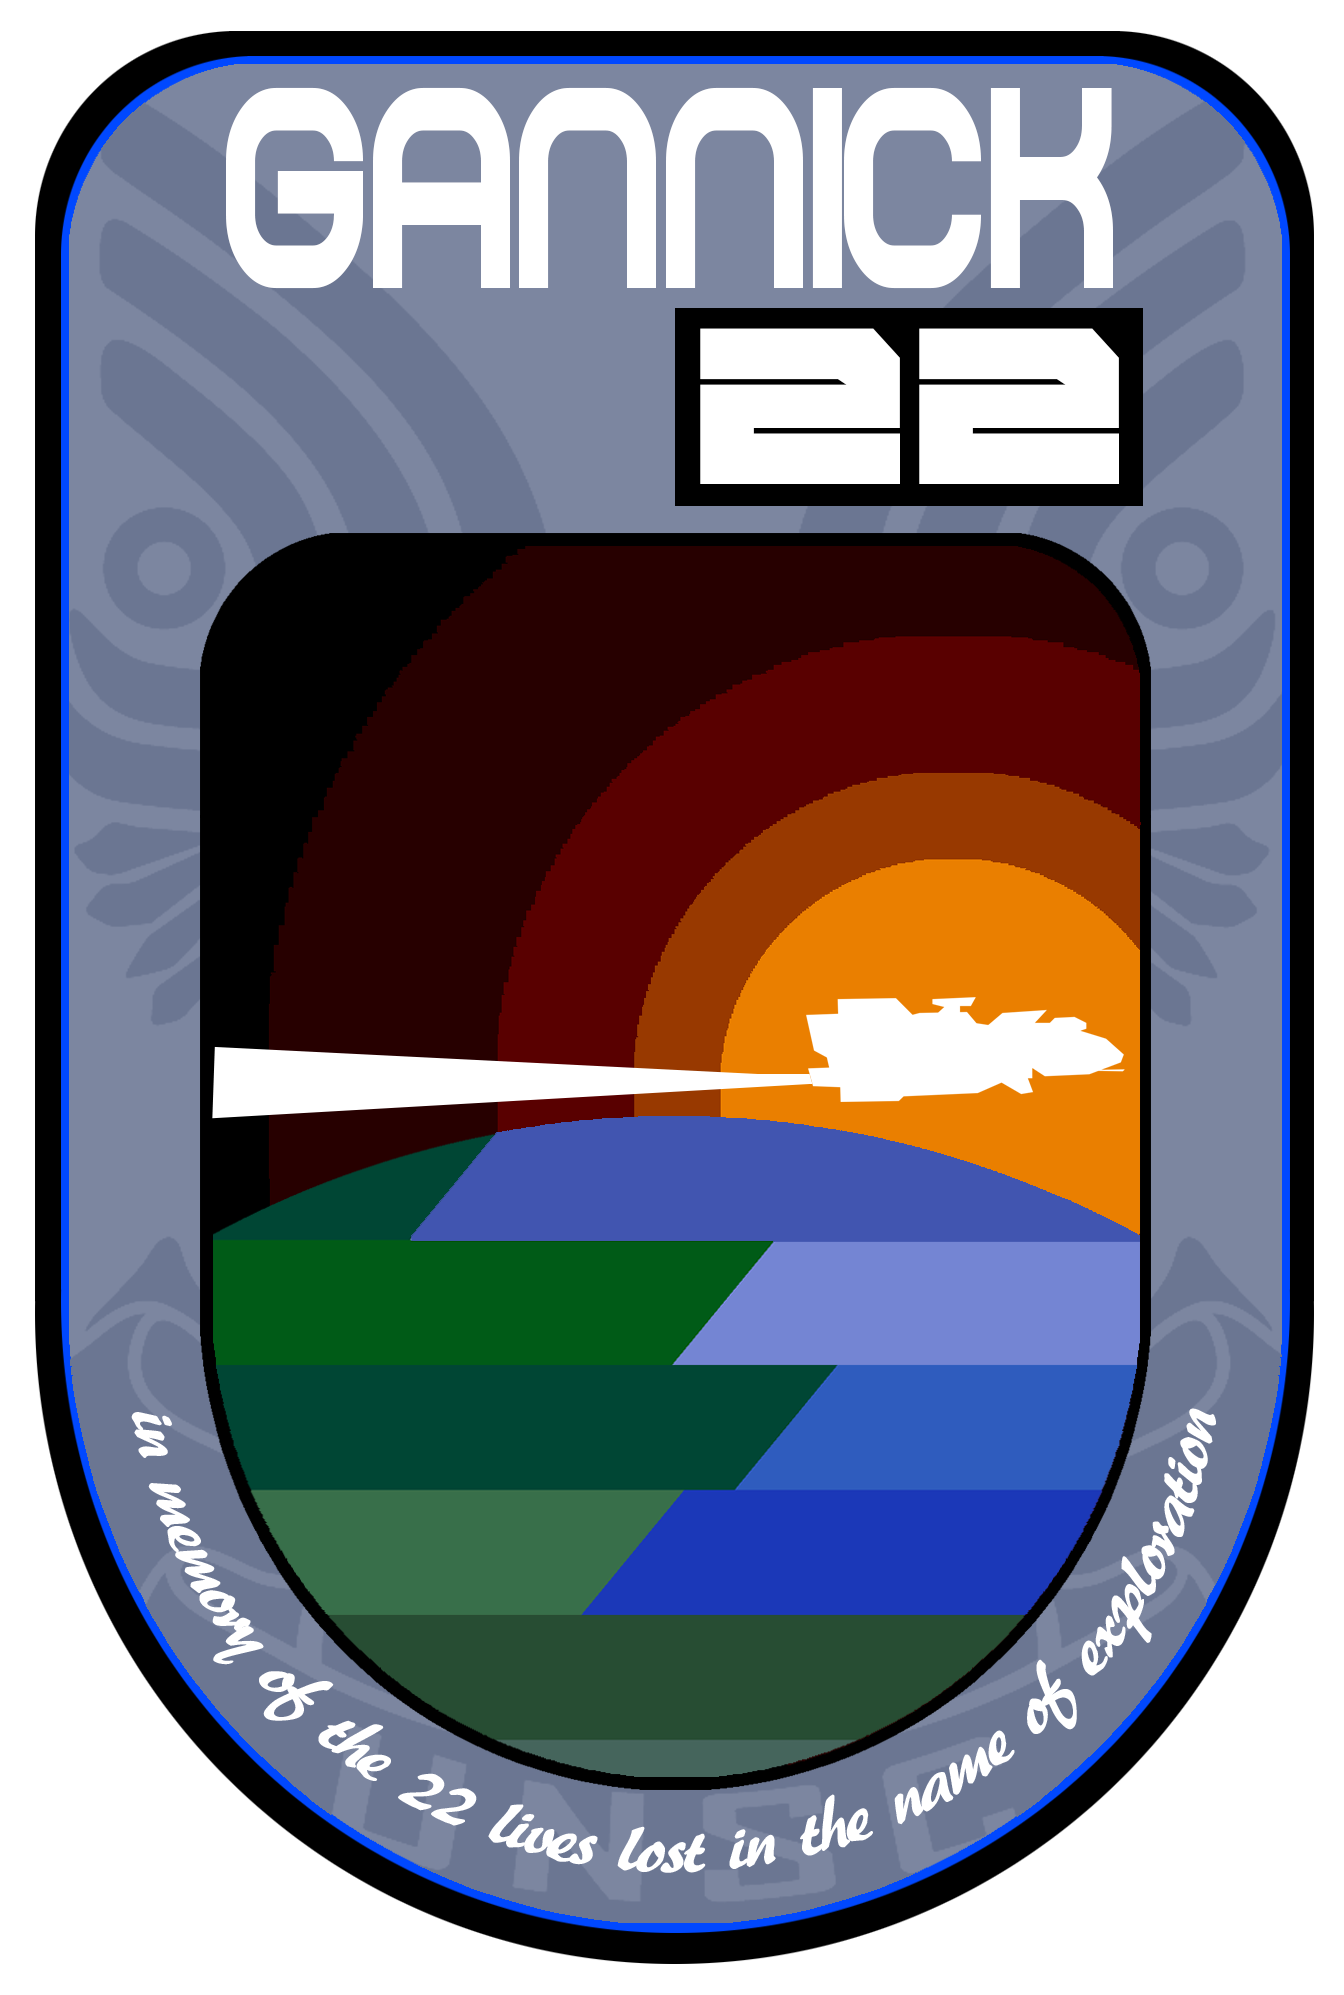 Gannick 22 - Mission patch remembering the 22 lives lost on the first research mission to Gannick 22. Vector version available upon request.